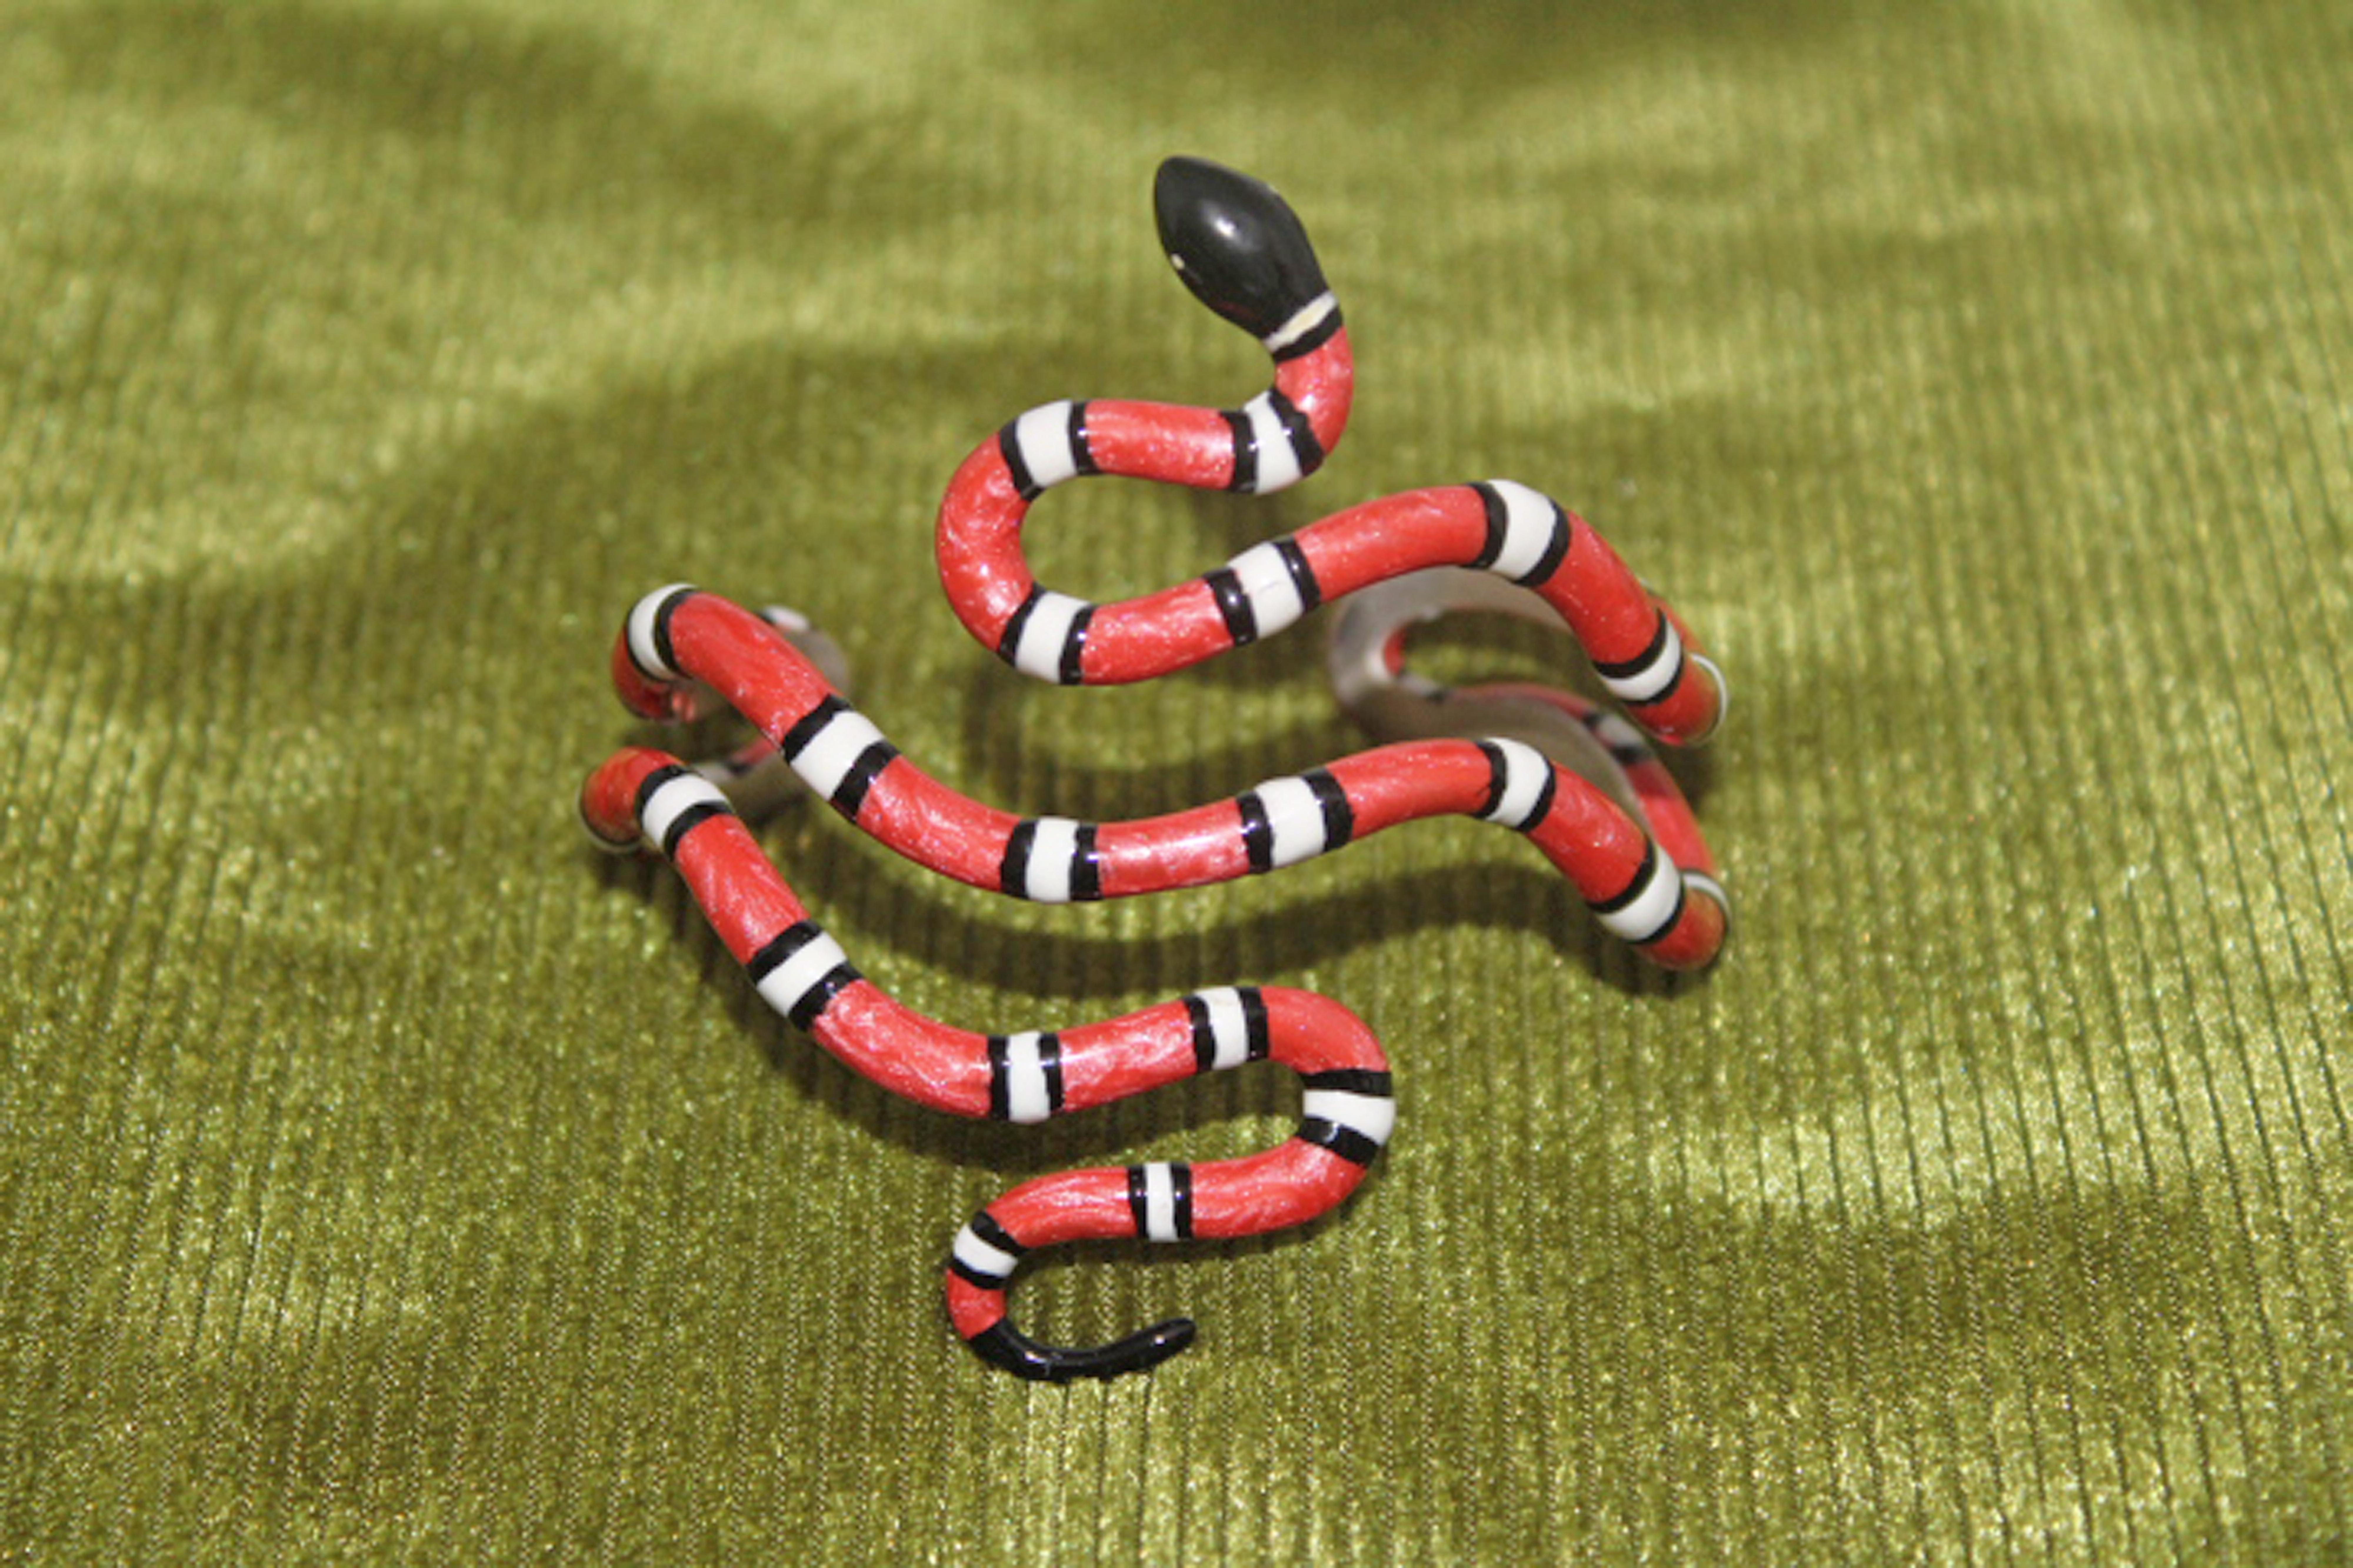 Snake bracelet made in 925 silver embellished by hand enamel.

Weight: 55 gr circa 

All AVGVSTA jewelry is new and has never been previously owned or worn. Each item will arrive beautifully gift wrapped in a AVGVSTA box, put inside an jewel box and